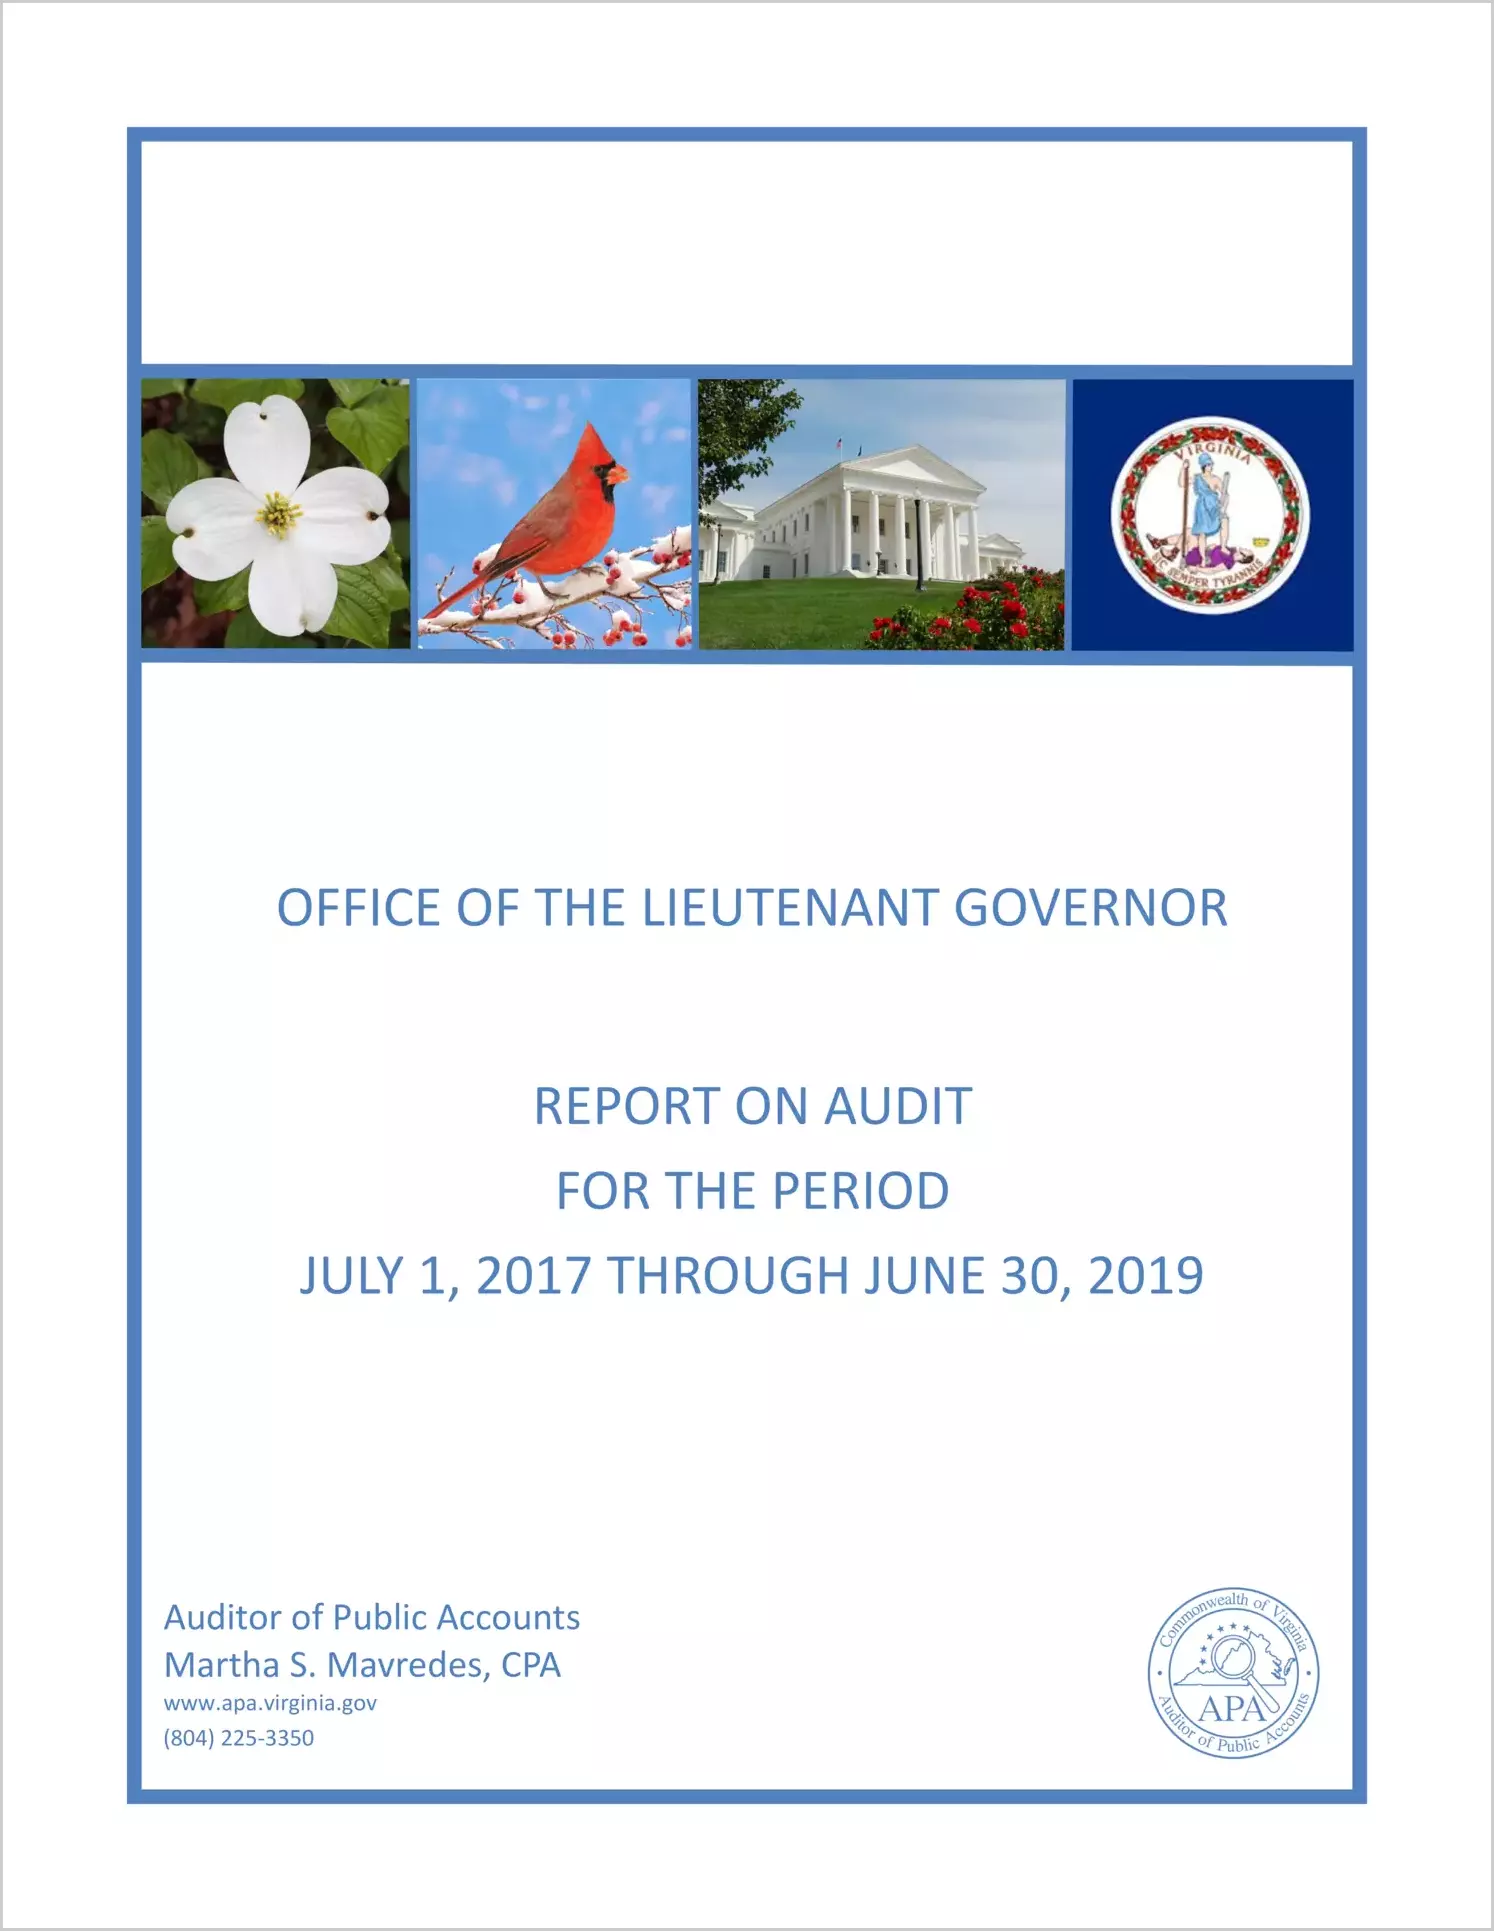 Office of the Lieutenant Governor for the period July 1, 2017 through June 30, 2019